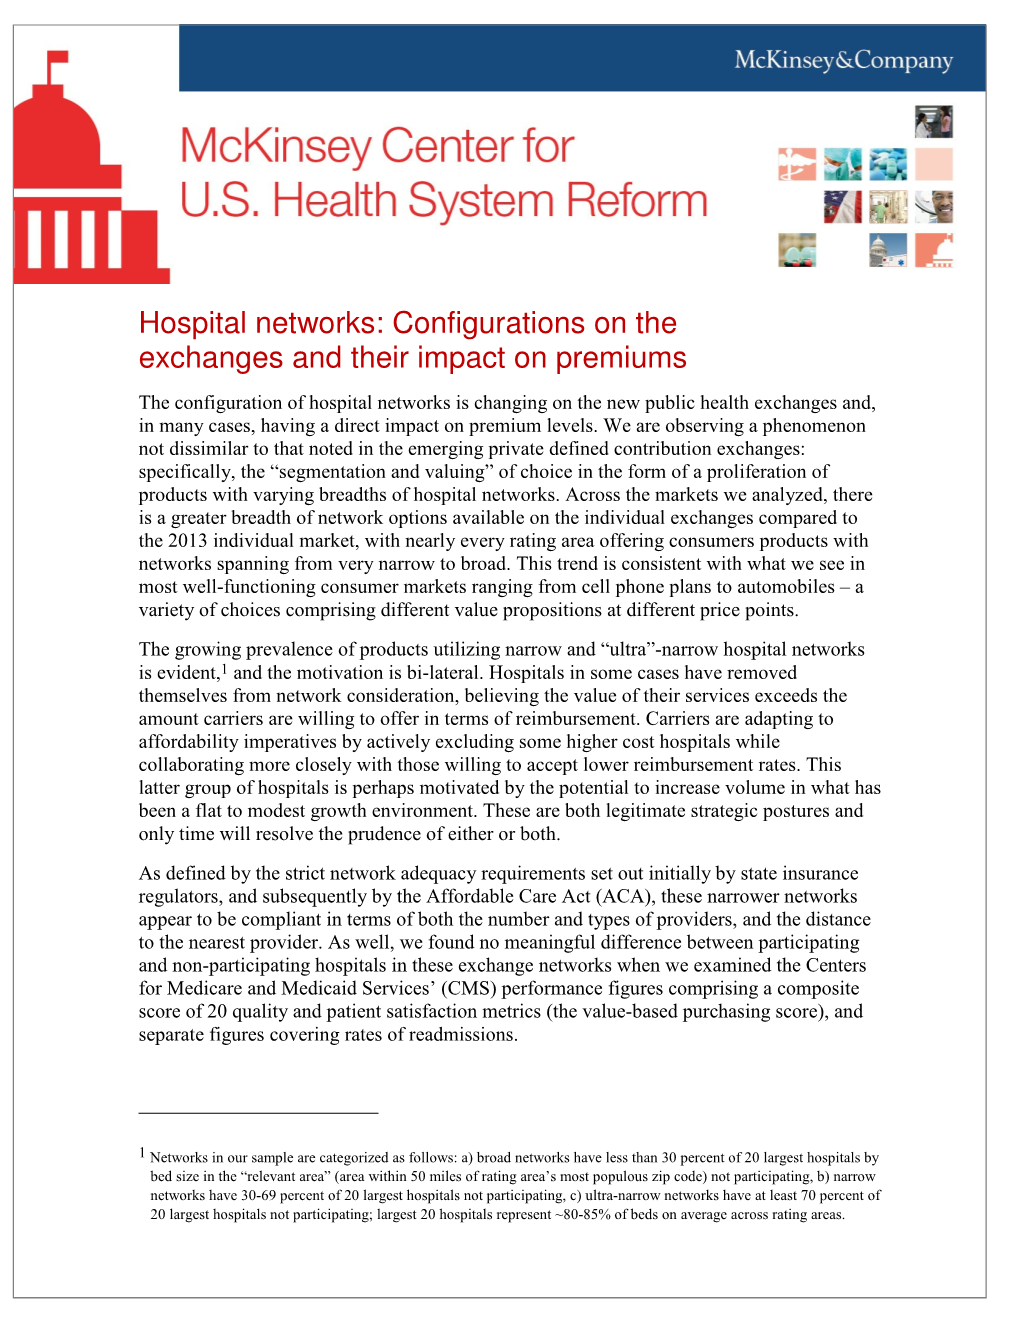 Hospital Networks: Configurations on the Exchanges and Their Impact On